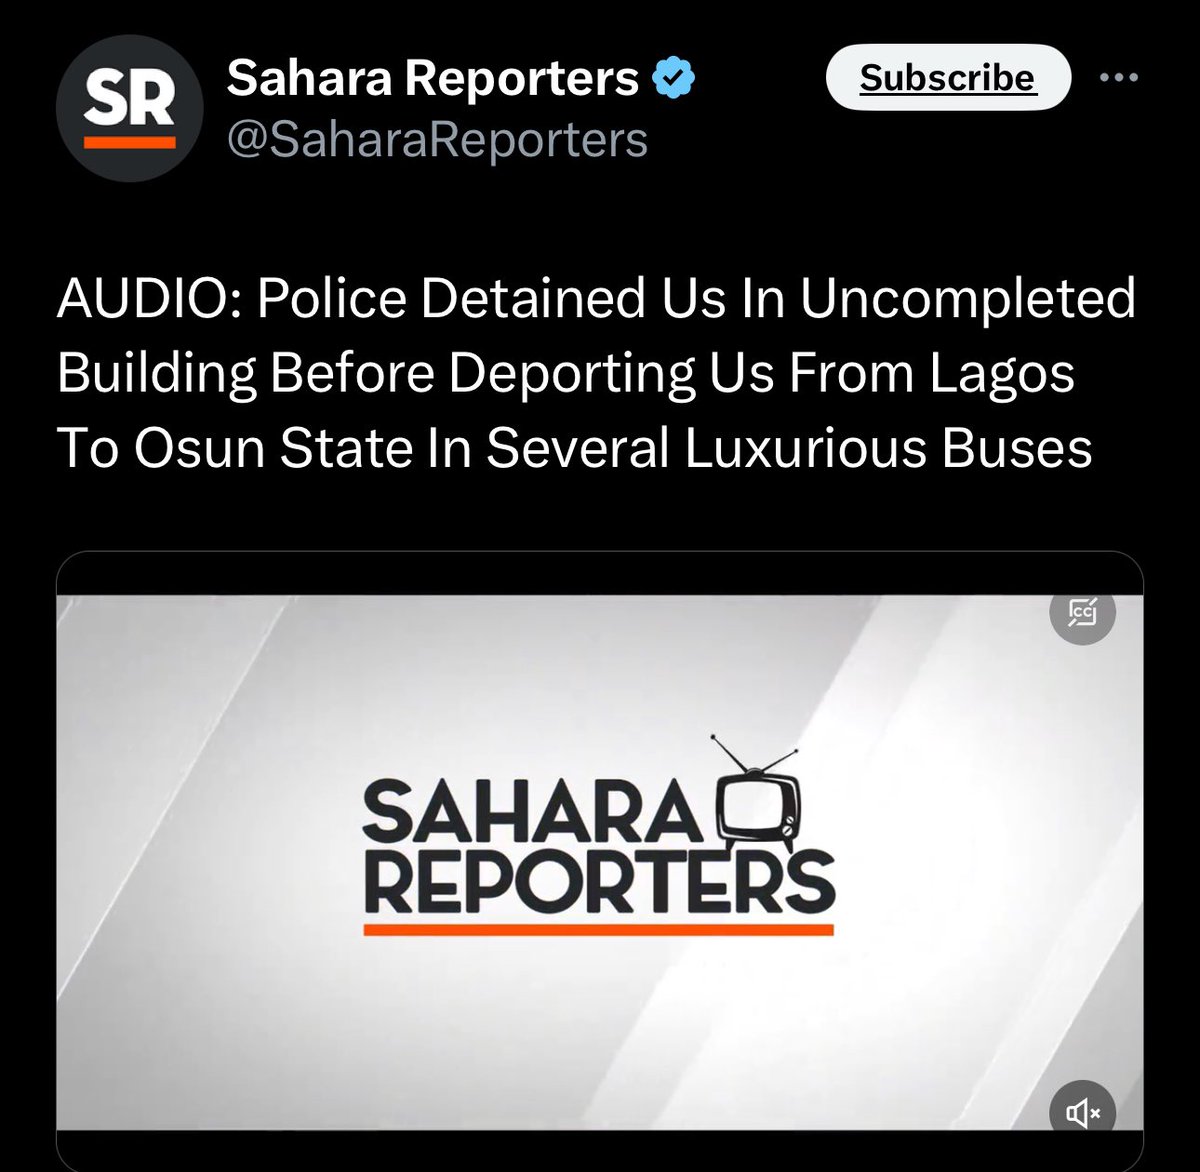 I hope this is not a way of securing justification for an impending mass deportation of Igbos from Lagos? Deporting Yorubas to Osun and hyping it out of control is as weird as it is suspicious. You know, like I’ve always said in the past, whenever the colonials run out of ideas